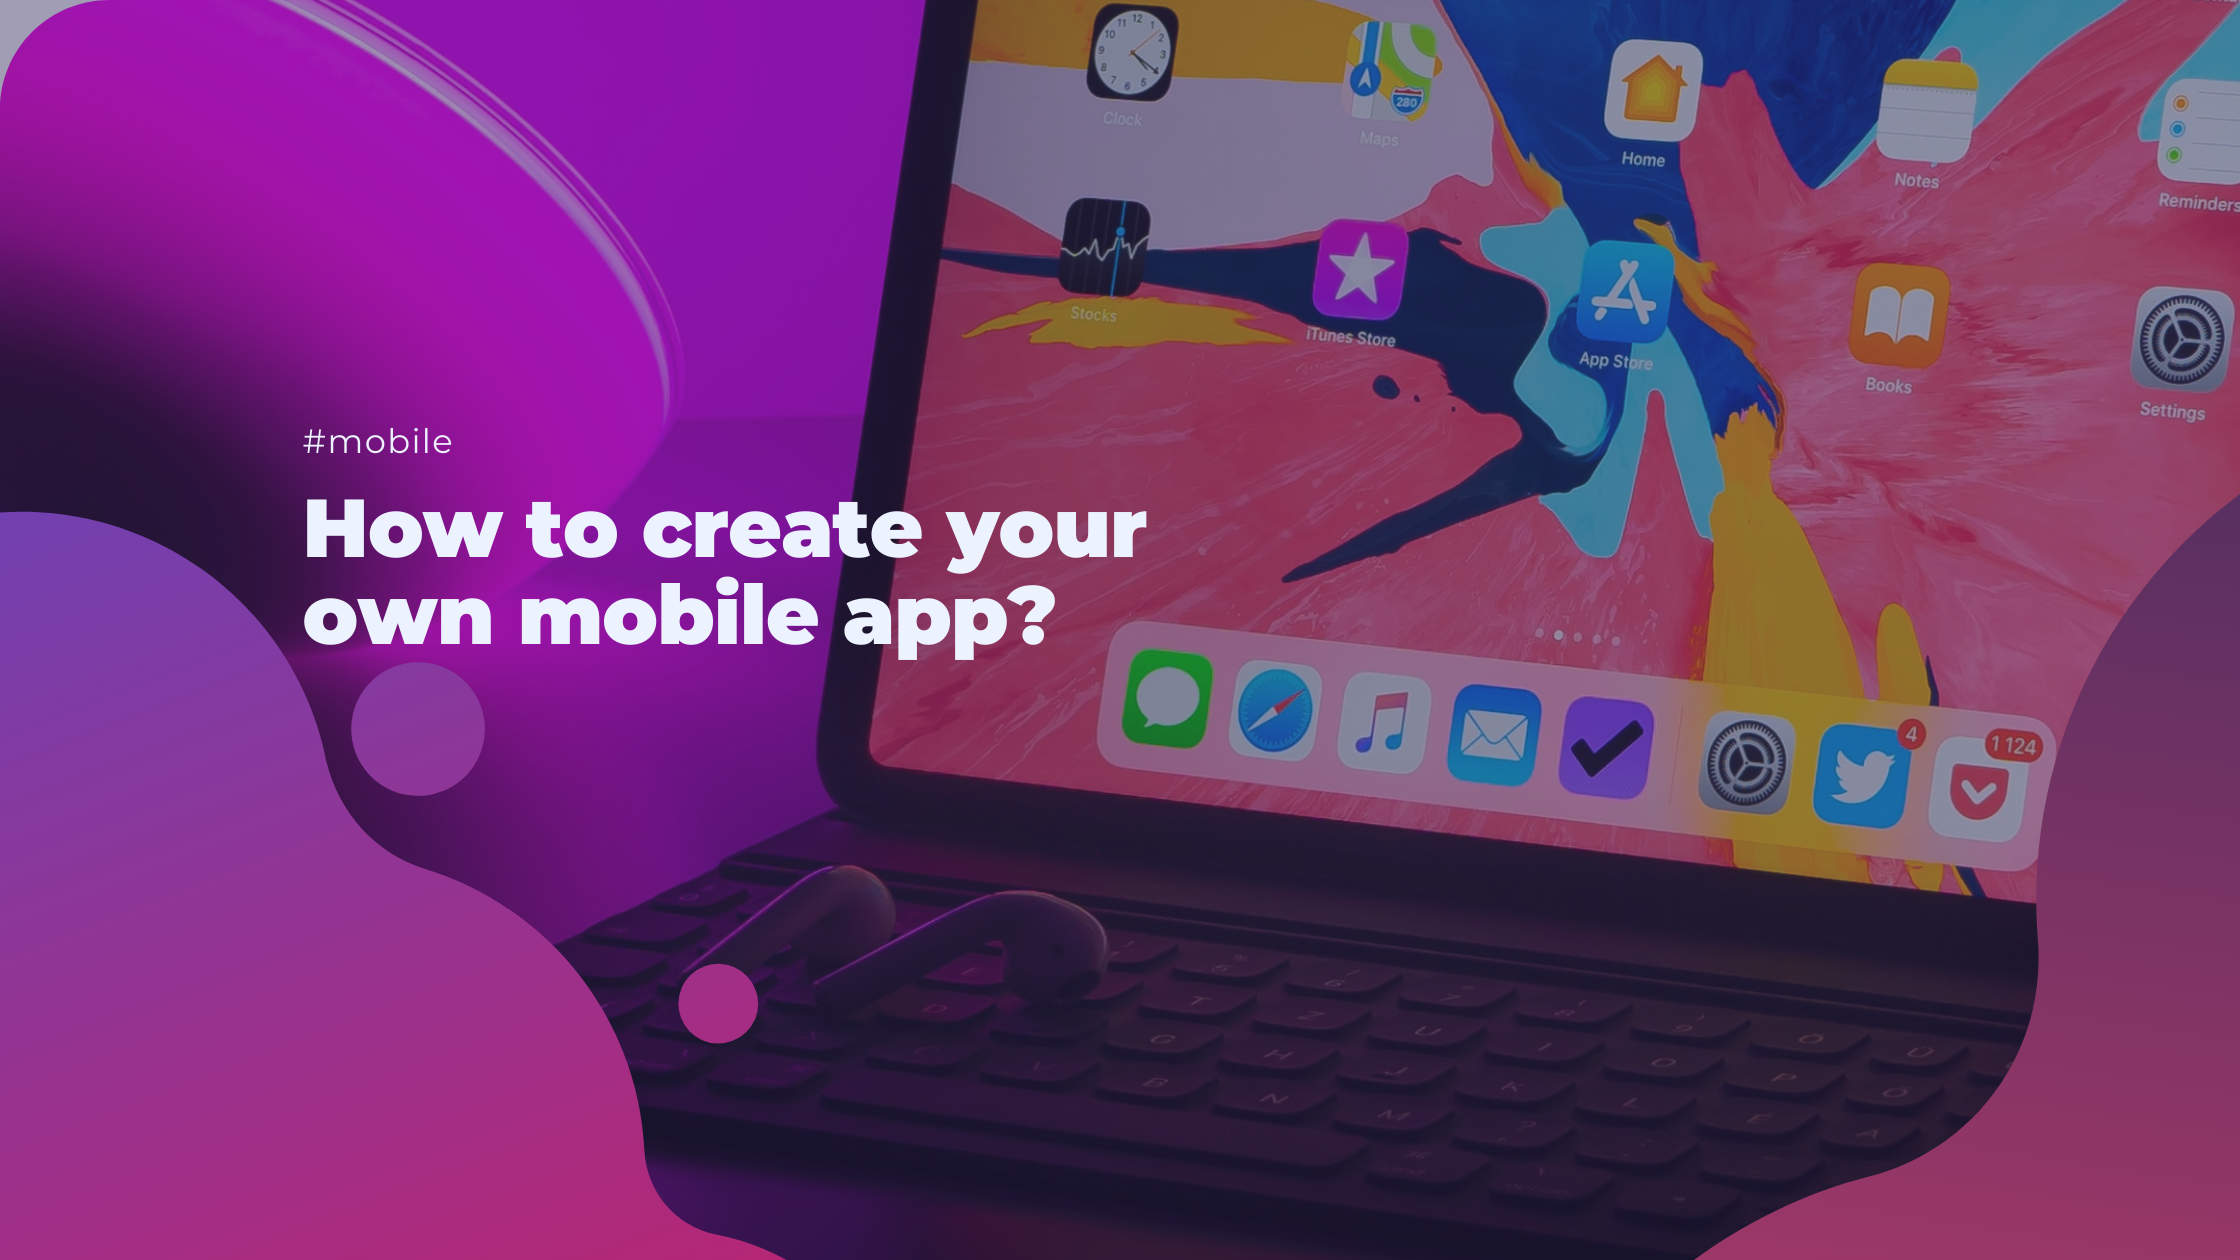 How to create your own mobile app?